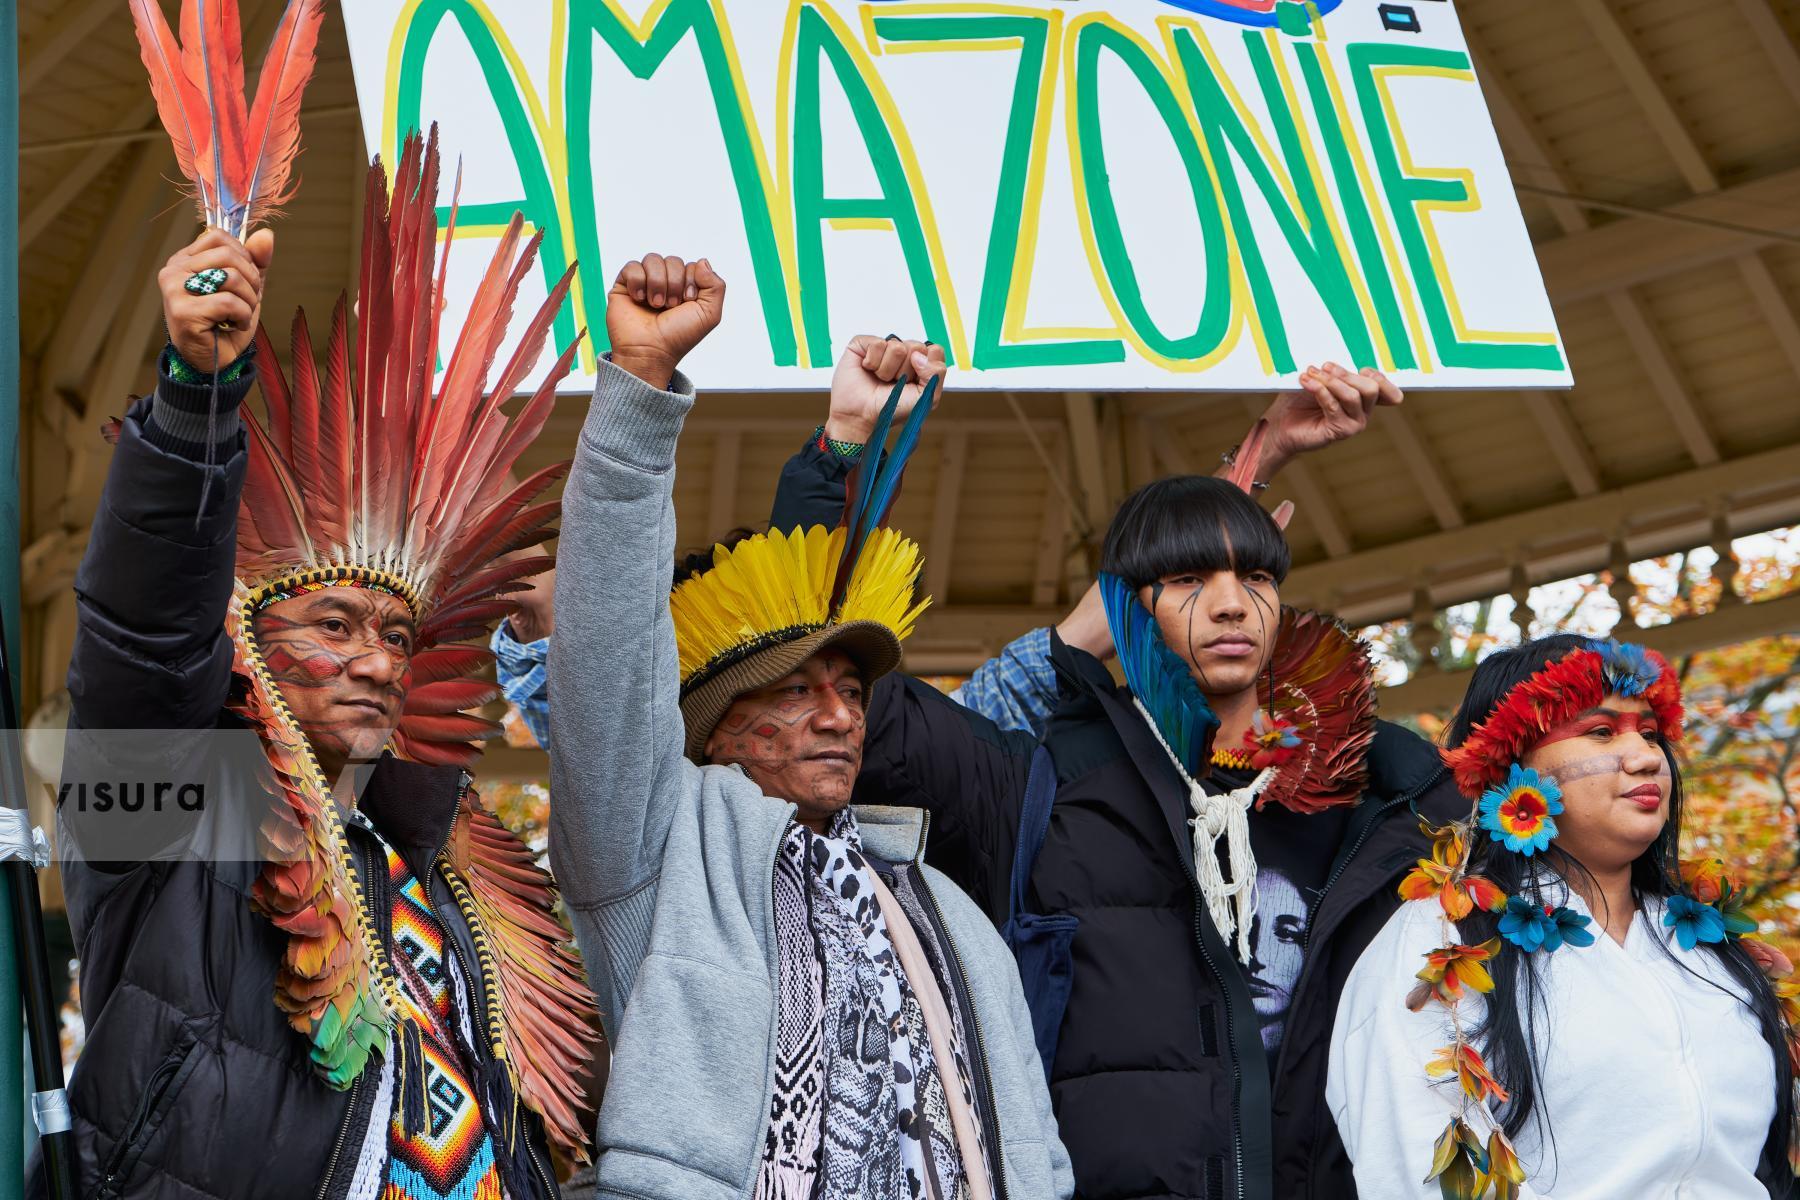 Purchase Gathering in Paris by tribal leaders from the Amazon rain forest in Brasil by Remon Haazen